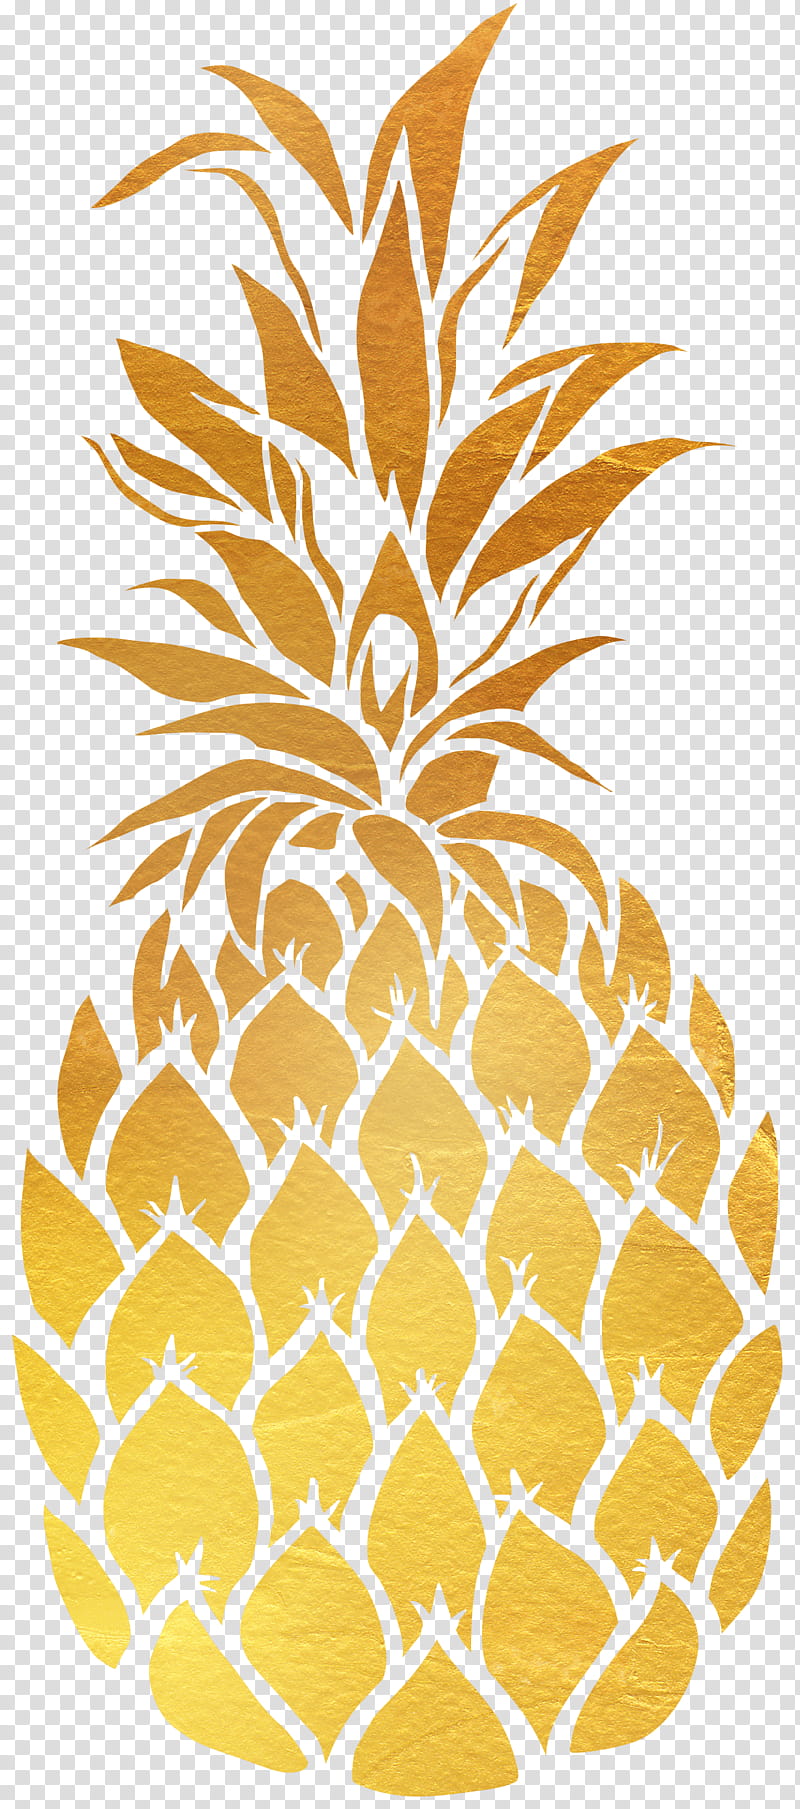 Painting, Stencil, Pineapple, Craft, Do It Yourself, Template, Fruit, Drawing transparent background PNG clipart